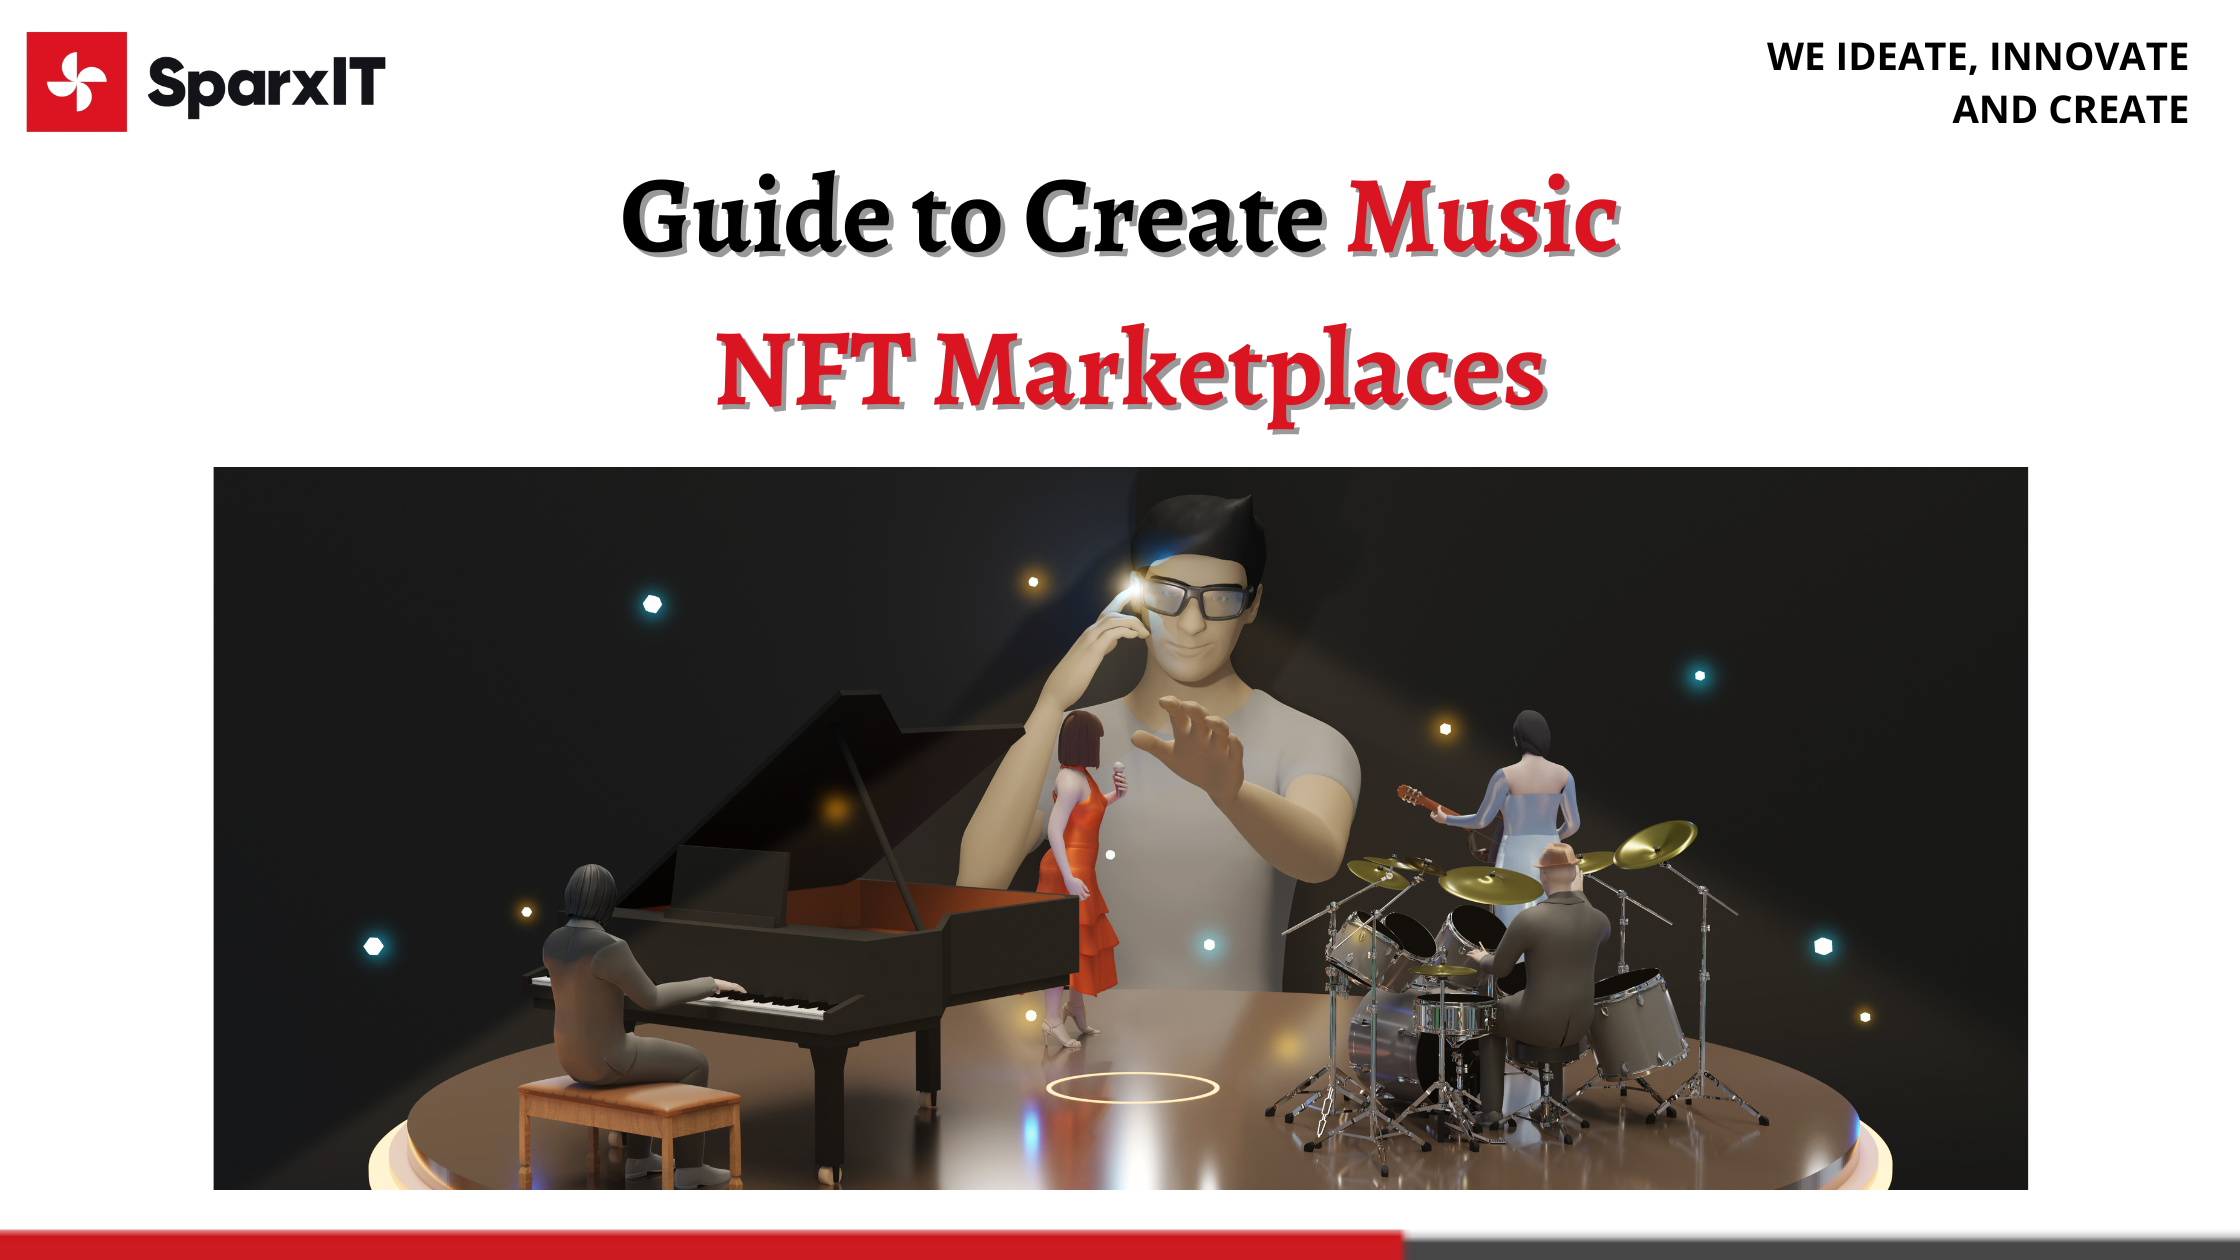 Guide to Create Music NFT Marketplaces